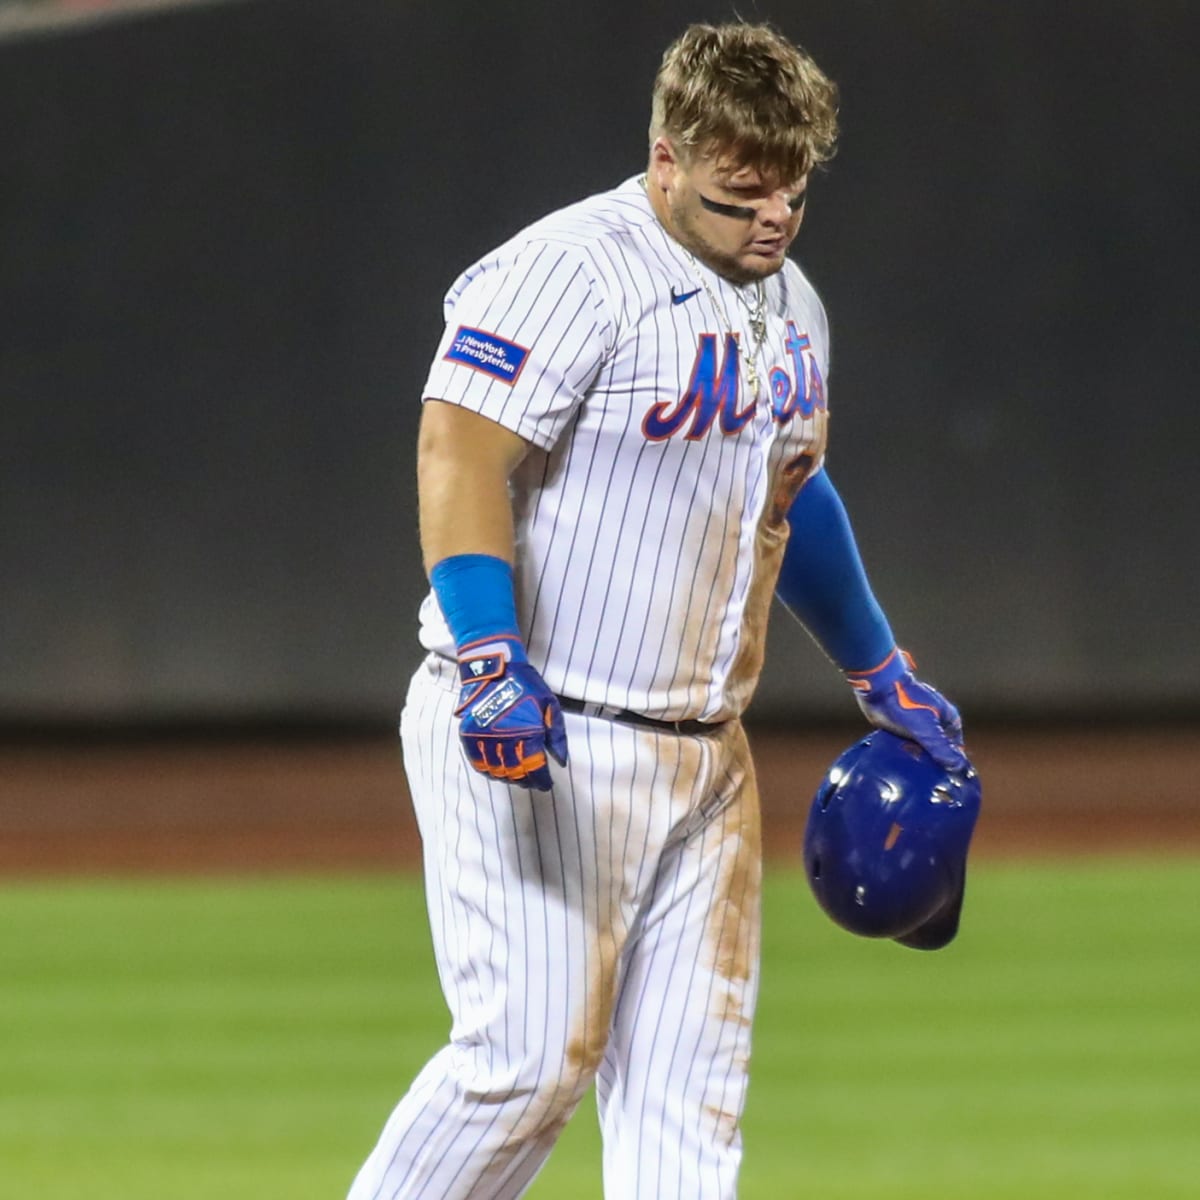 Mets reporter: 'Stop making Daniel Vogelbach's weight a story